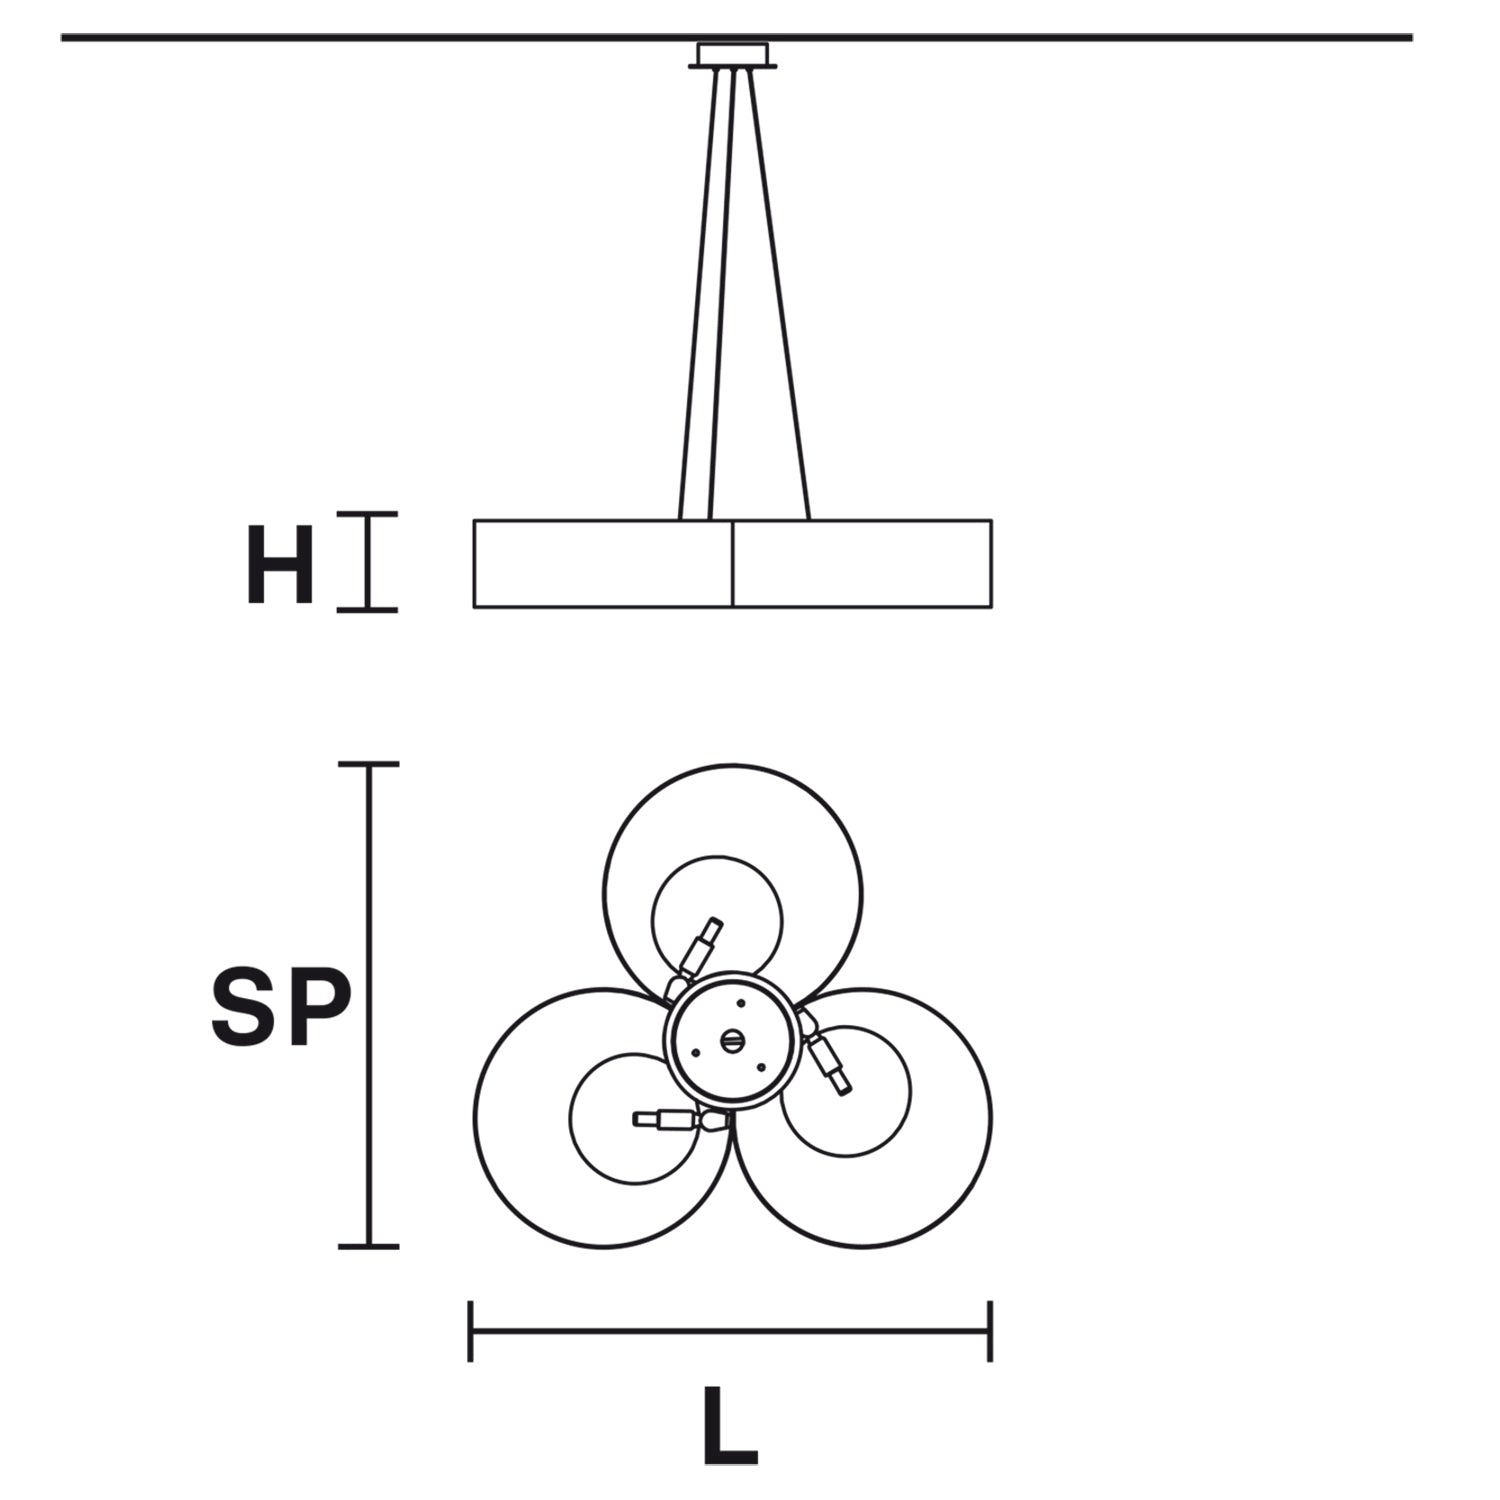 Sound OR3 Suspension Lamp Specifications